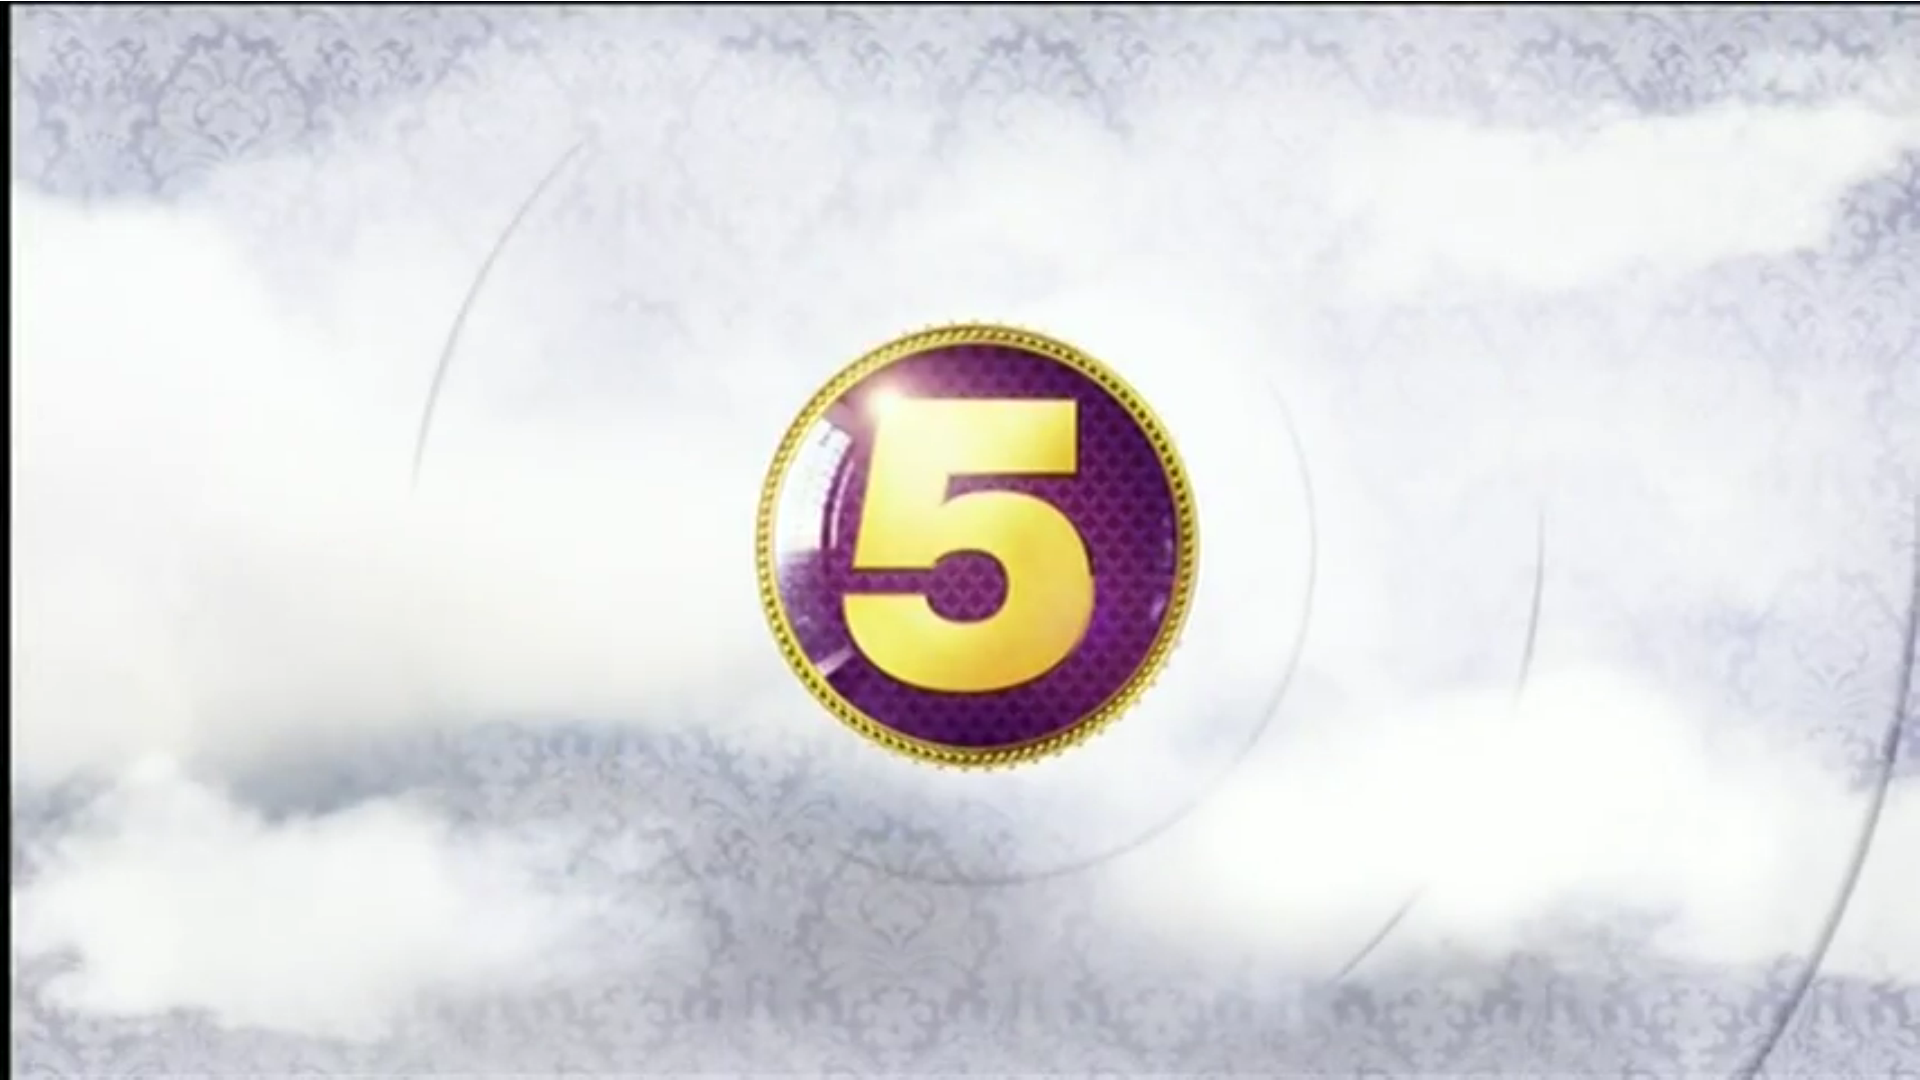 Pre-CBB: Channel 5 air Celebrity Big Brother Advert